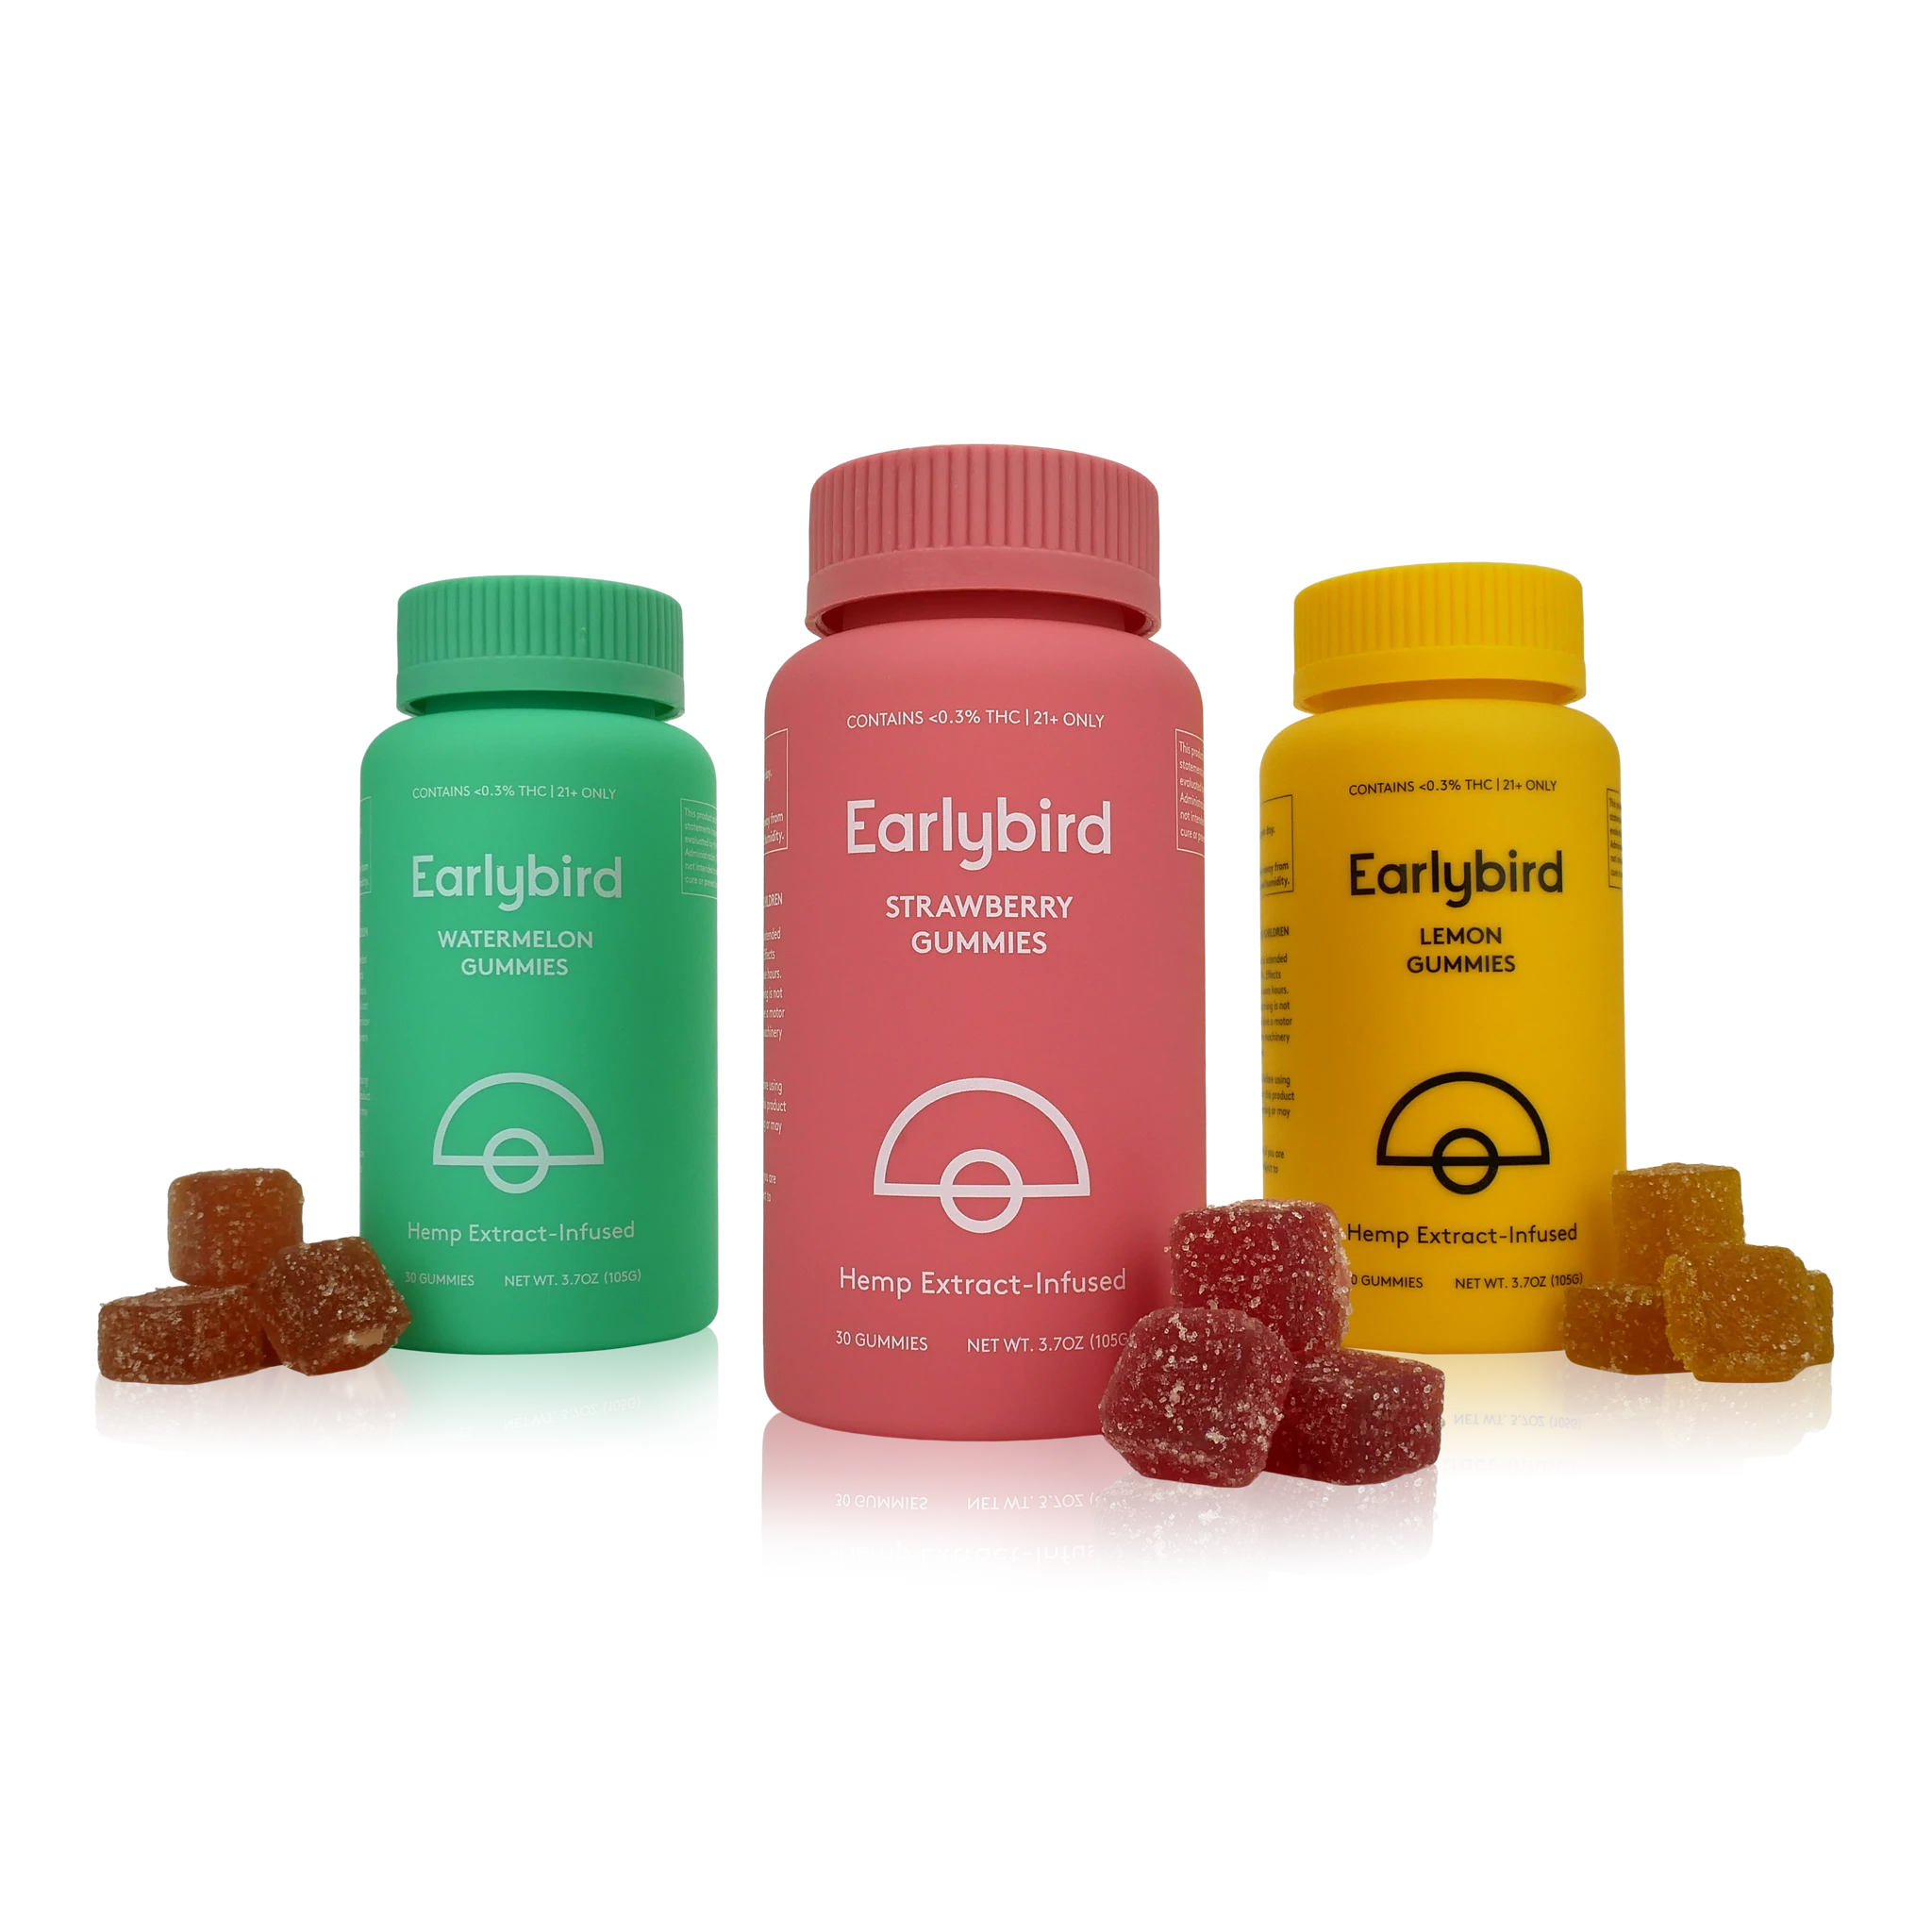 Earlybird CBD Gummies For Pain Relief - Free Shopping & 15% Off